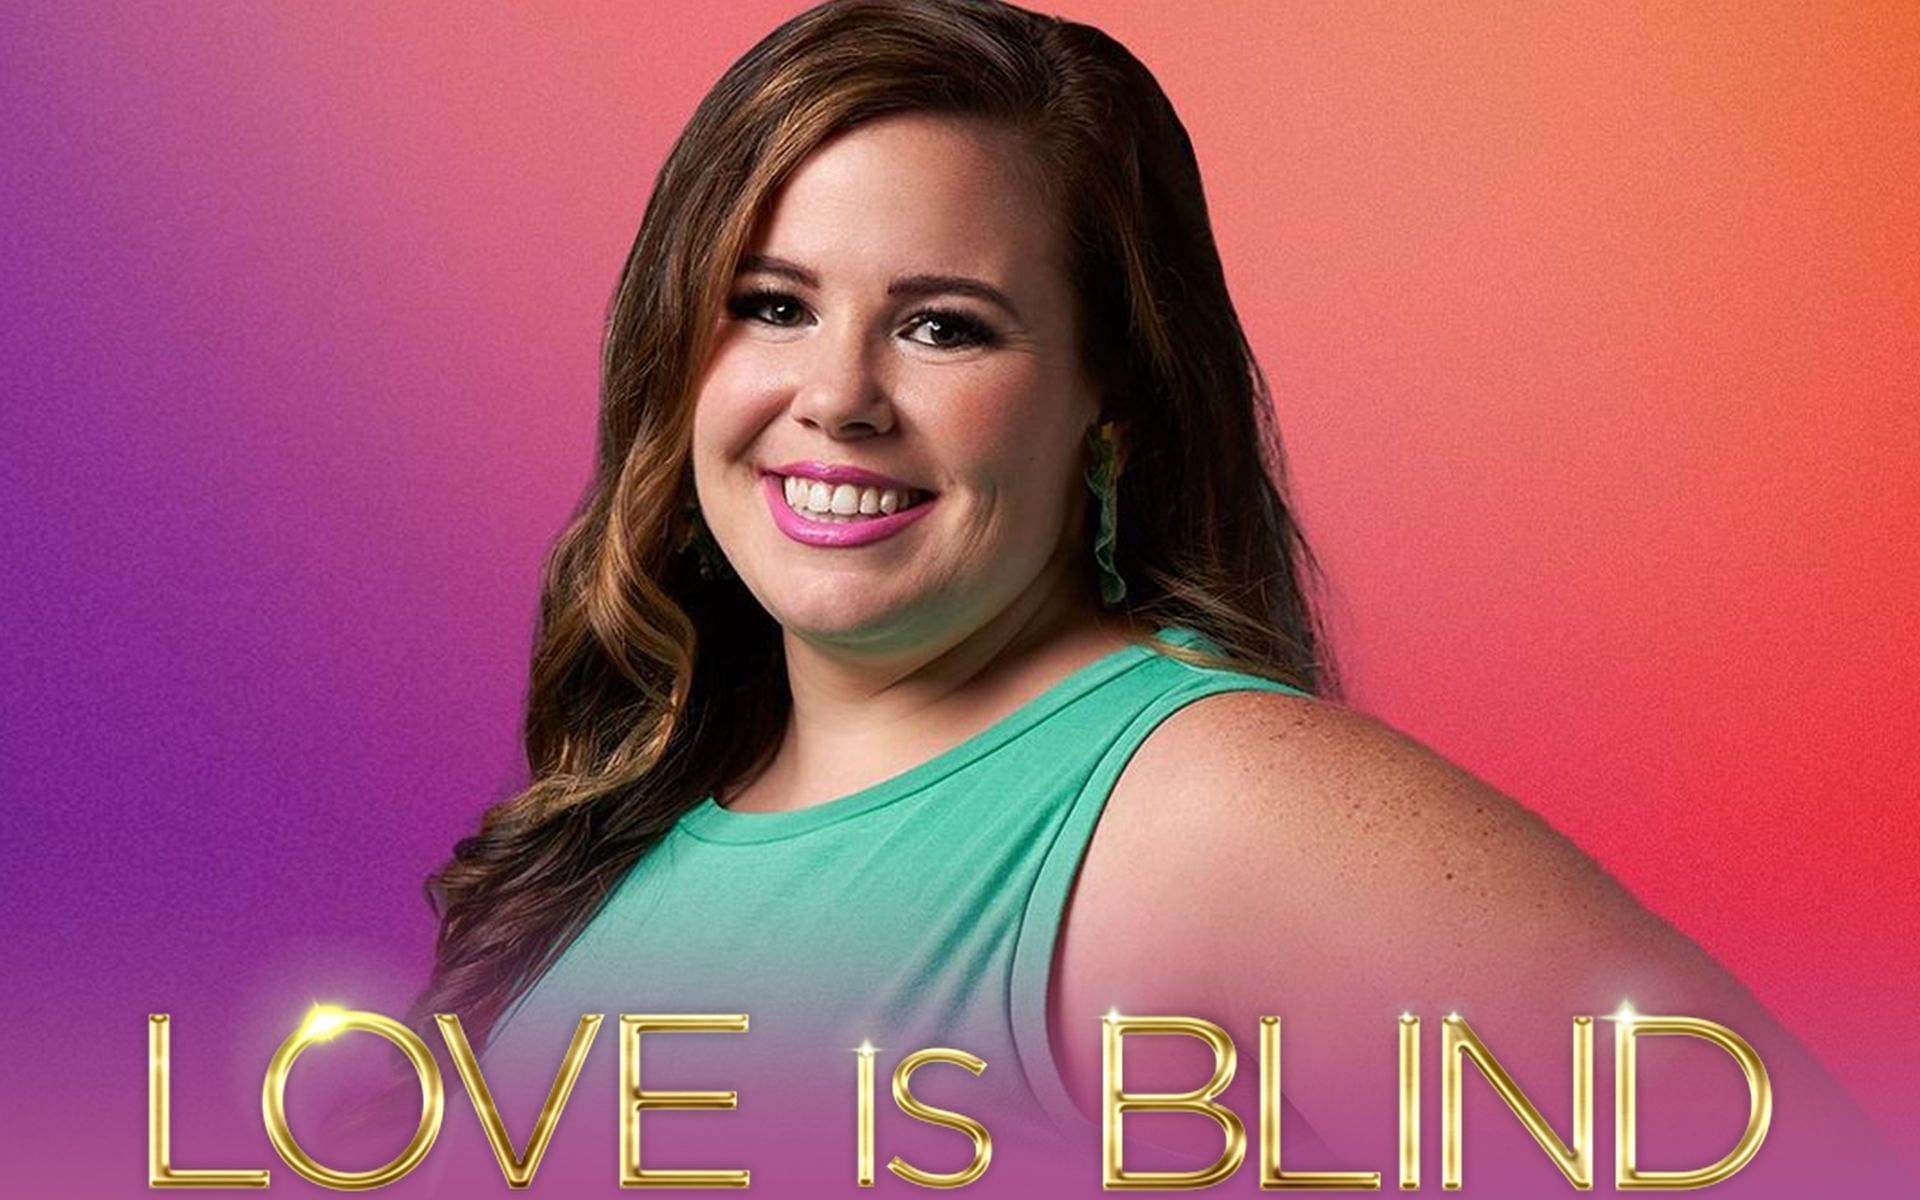 Hope Alicia from the second season of Love is Blind (Image via Love is Blind/Instagram)